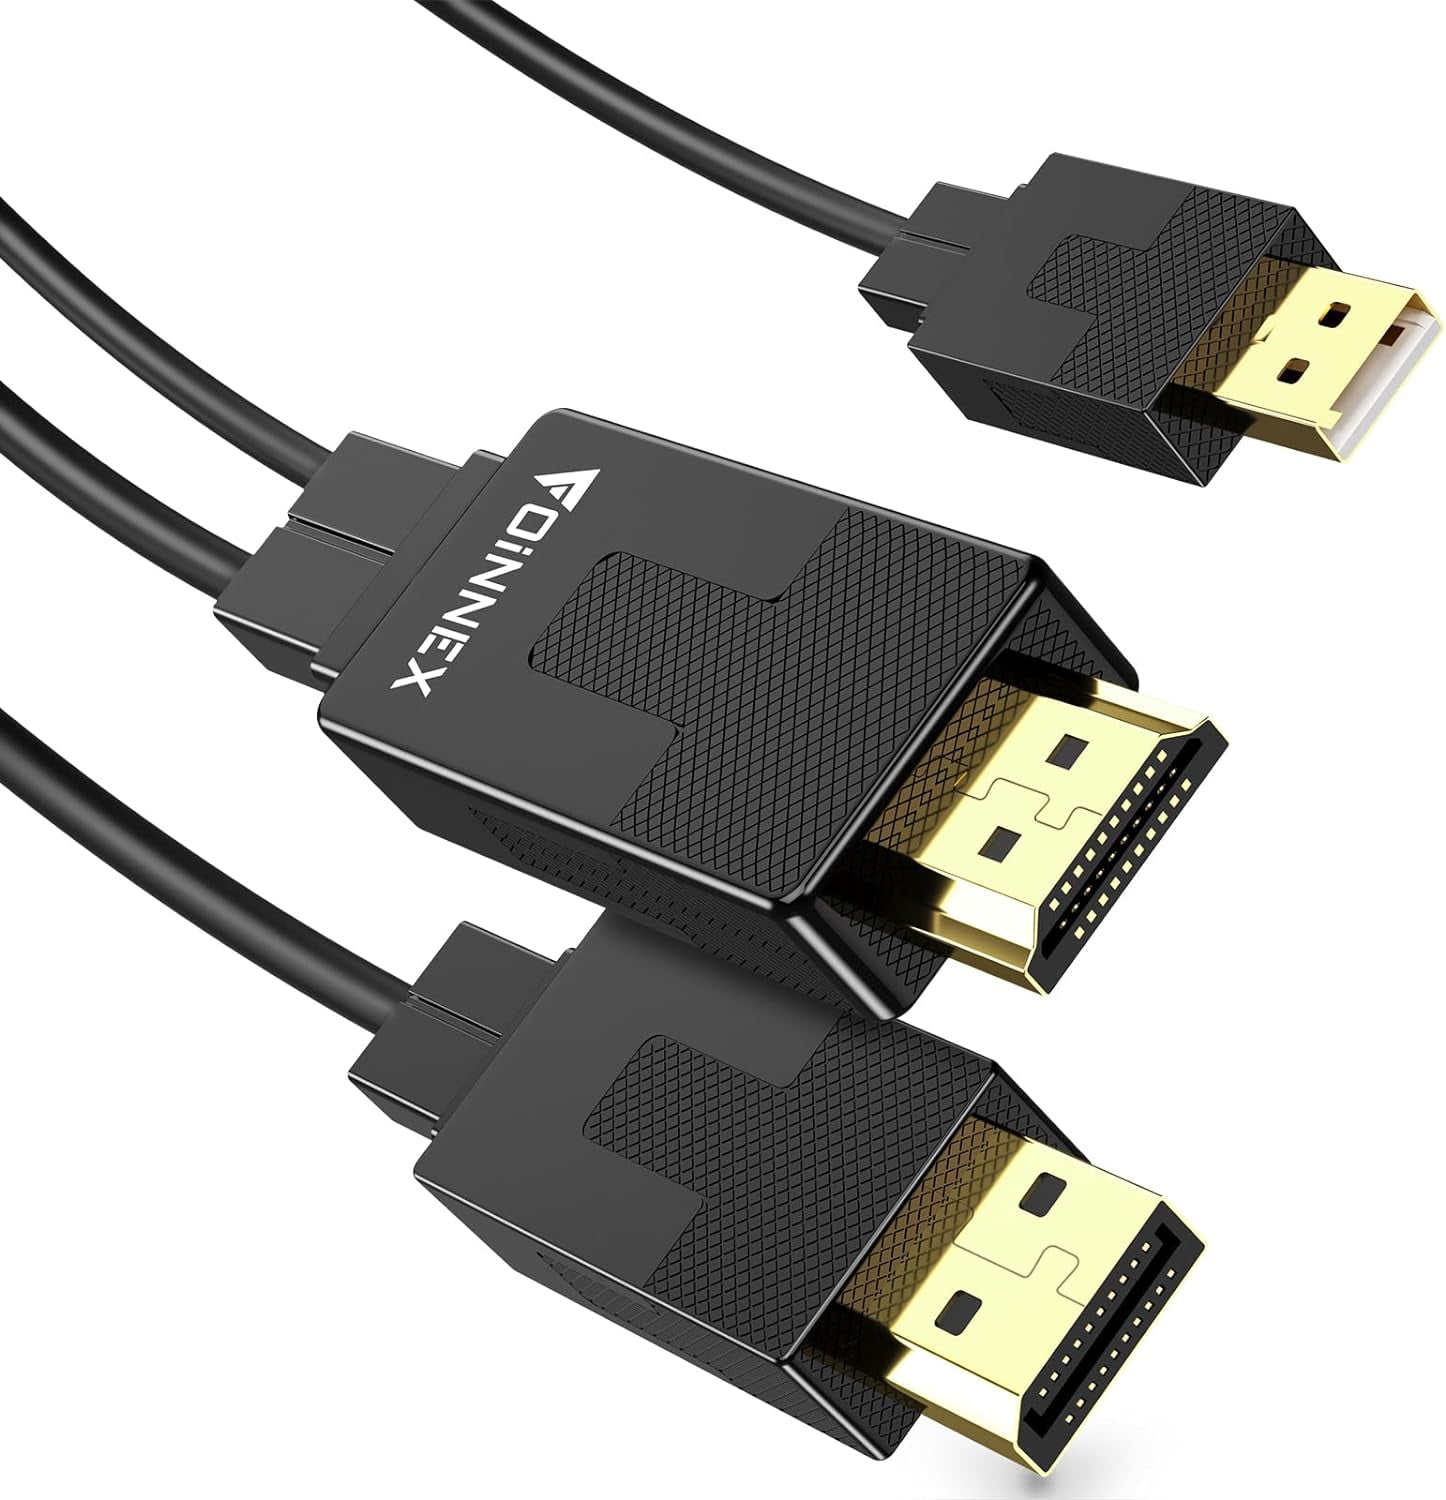 FOINNEX HDMI to DisplayPort (DP) Cable 4FT, Transmits Signal only from HDMI  Output to DisplayPort Input, Supports